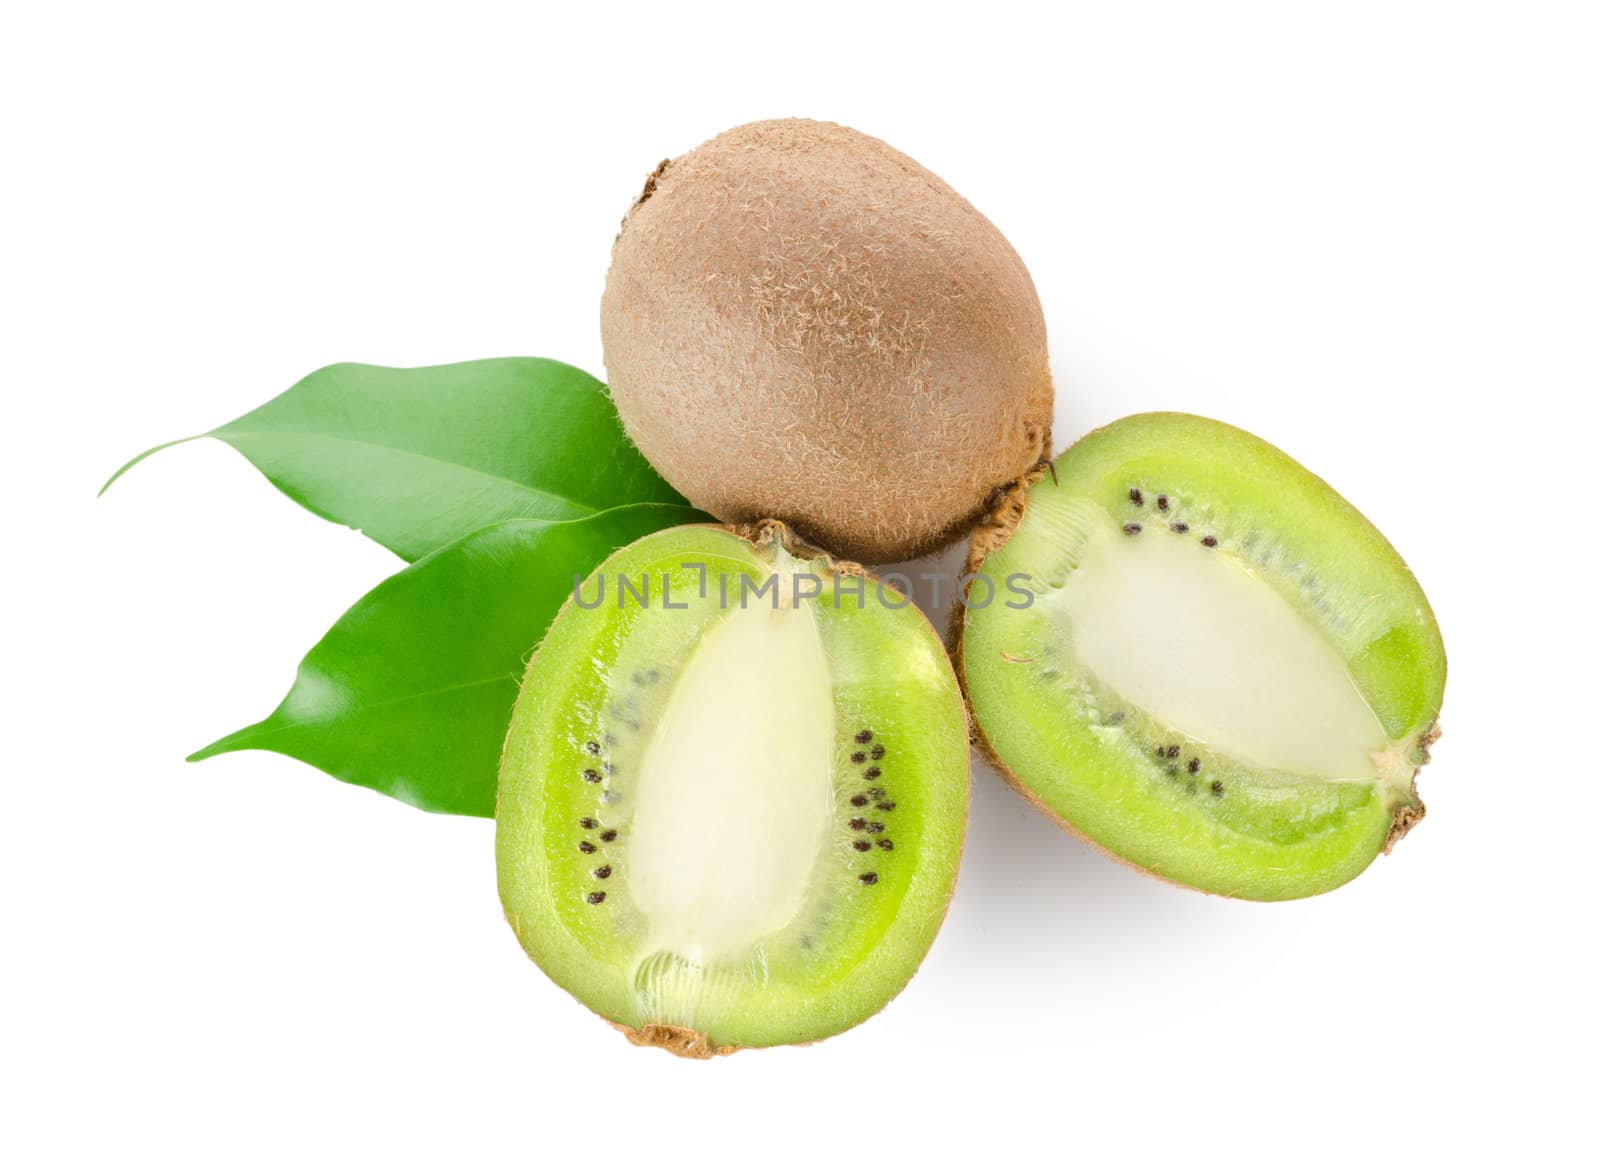 Fresh kiwi fruit with green leaves isolated on a white background